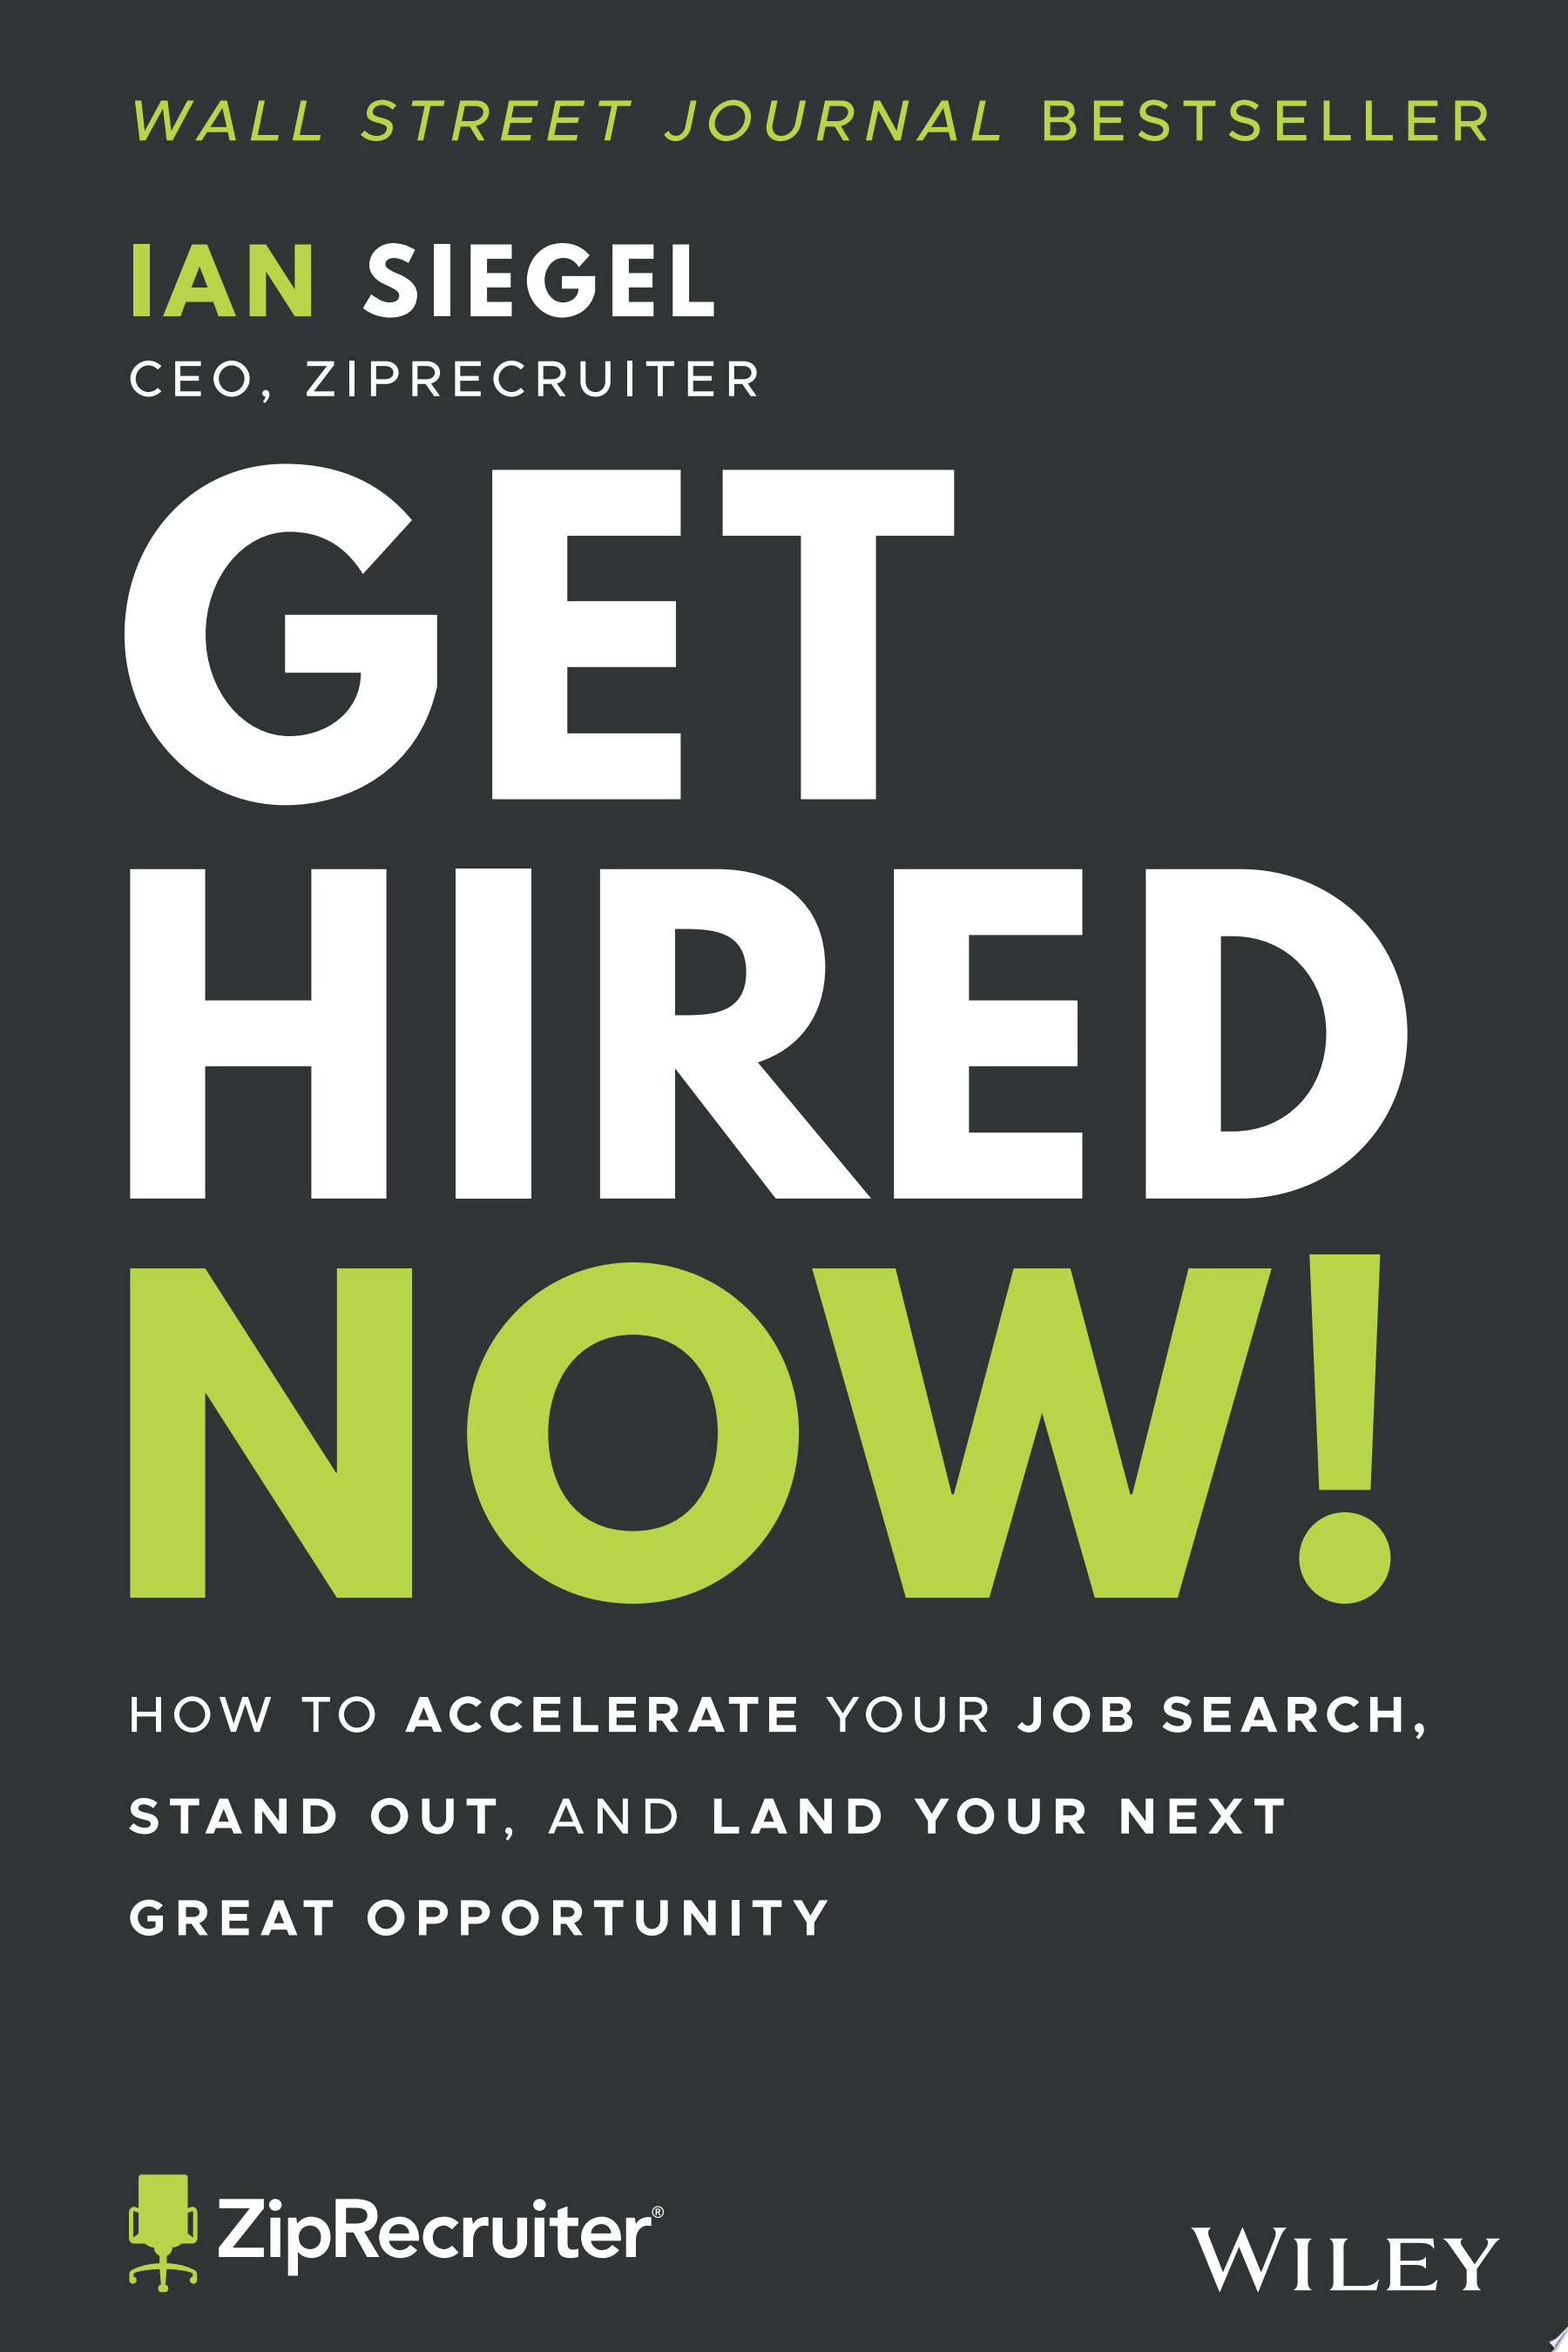 Image for "Get Hired Now!"